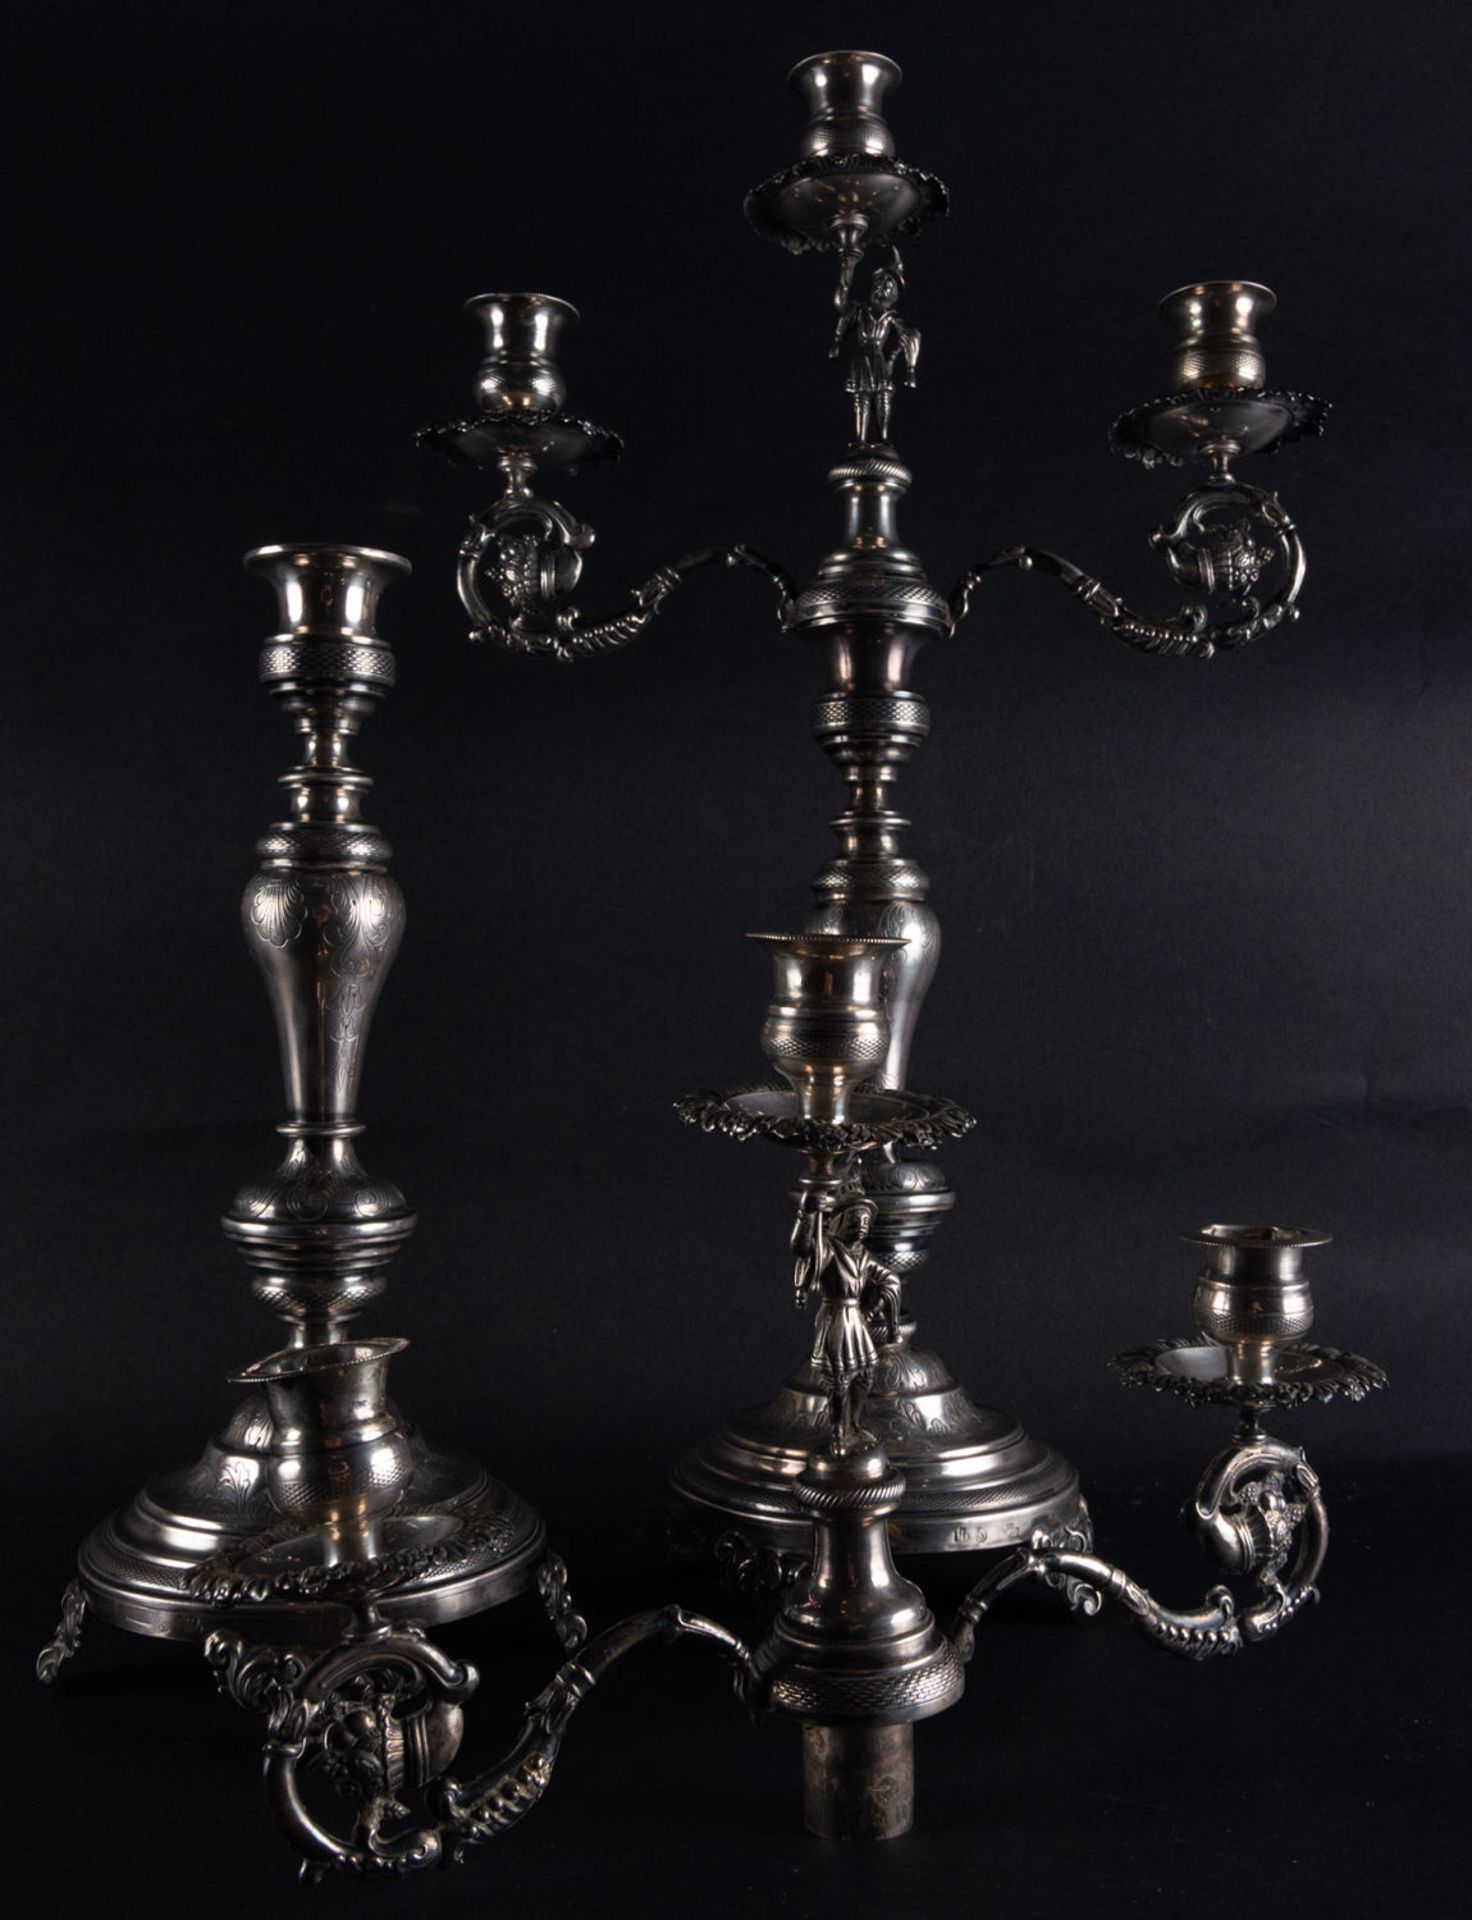 Pair of Important Fernandine Chandeliers in Sterling Silver, Barcelona hallmarks, early 19th century